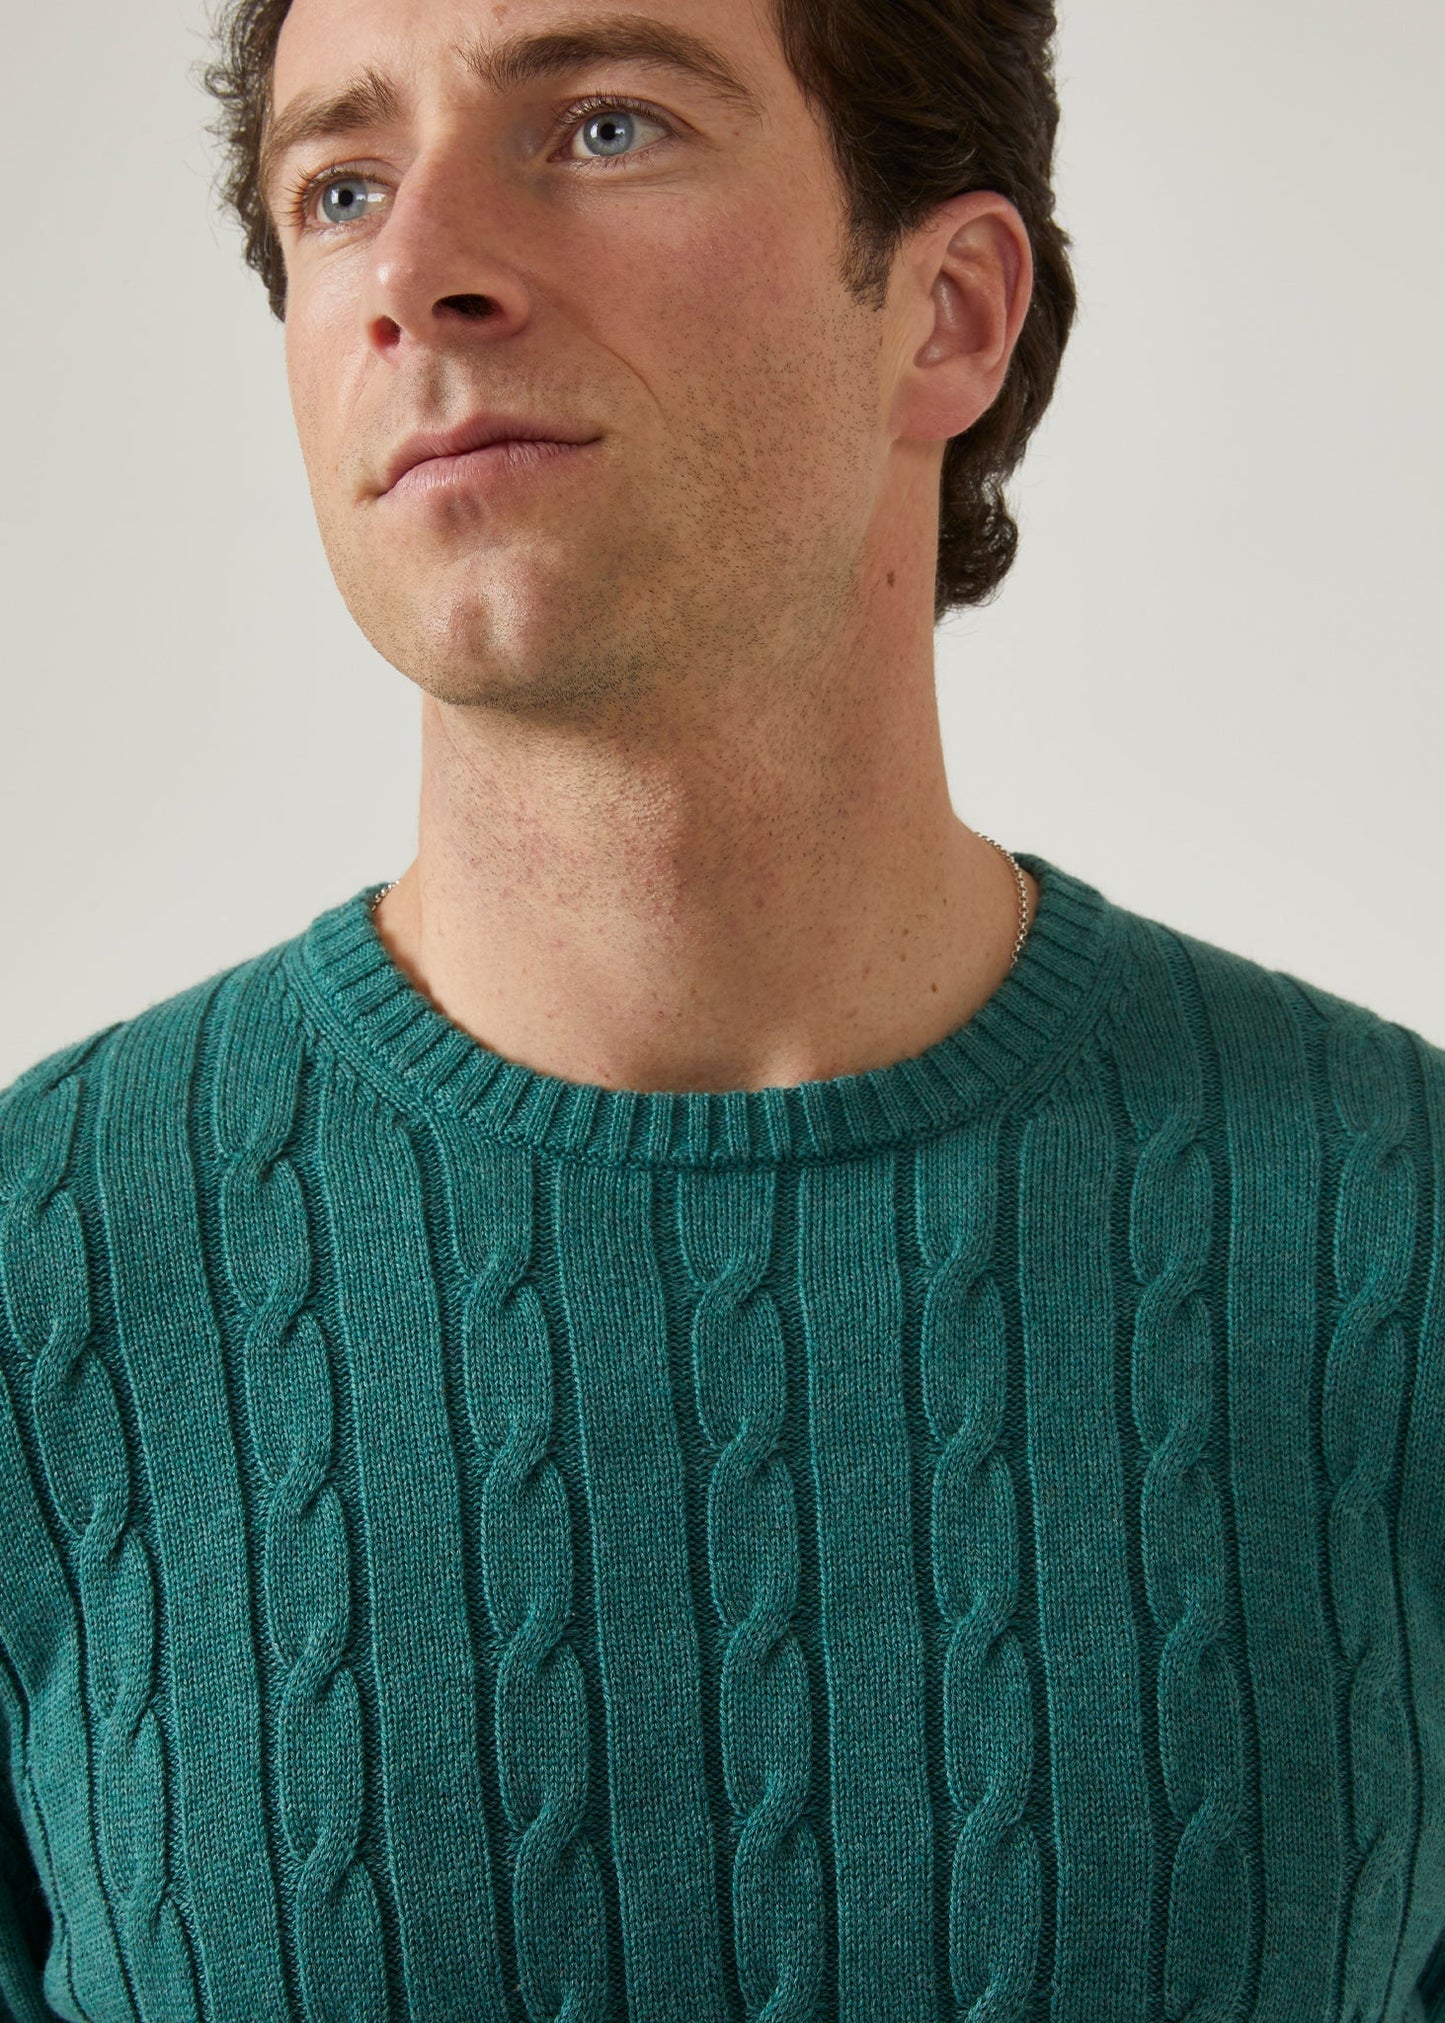 cotton cashmere jumper in moorland green with a crew neck design.